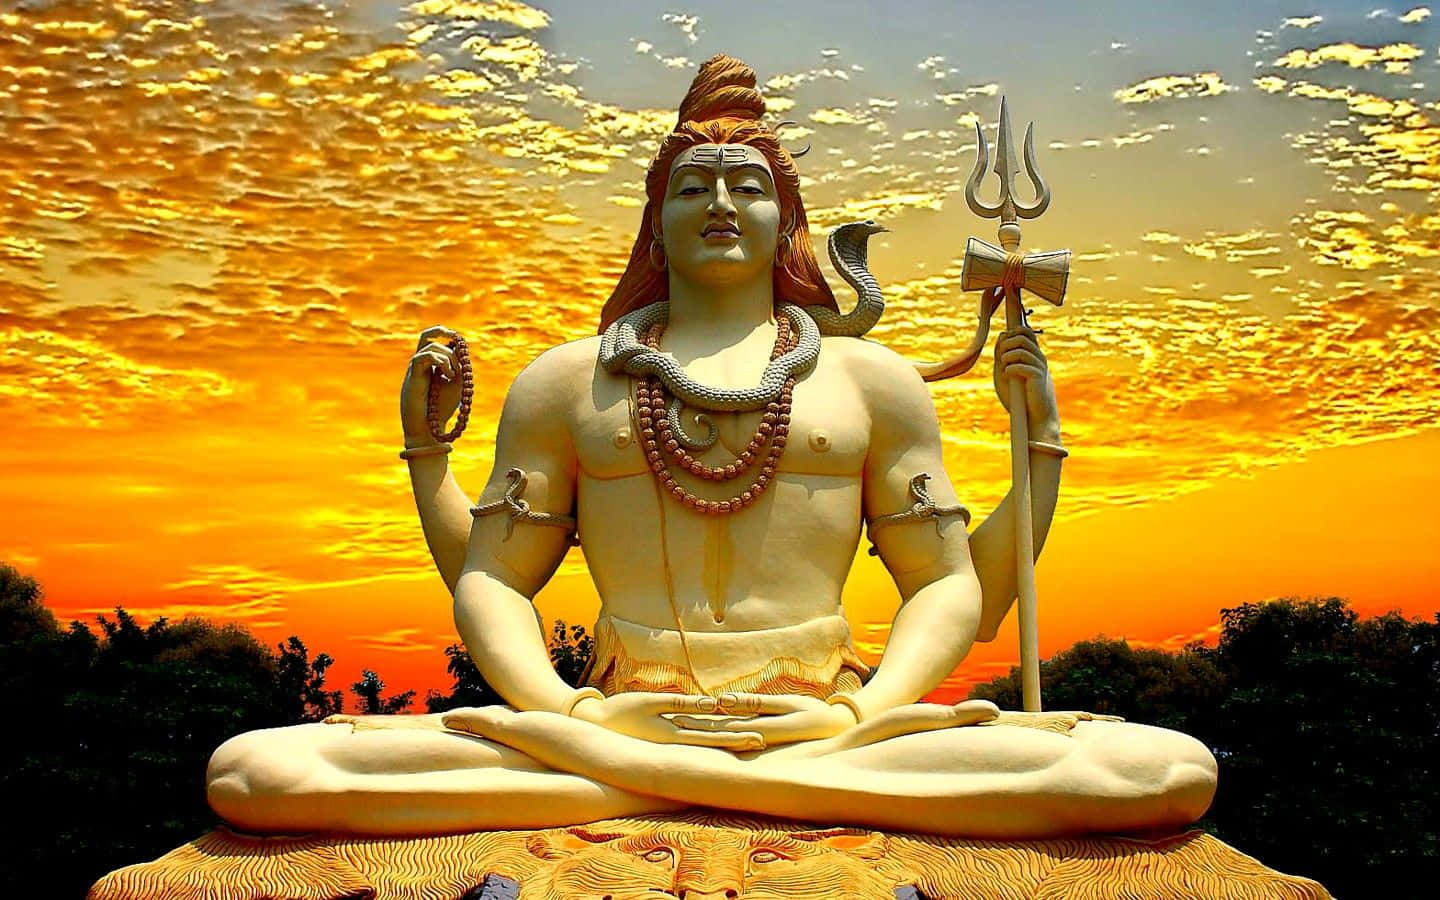 A Statue Of Lord Shiva Sitting In The Lotus Position